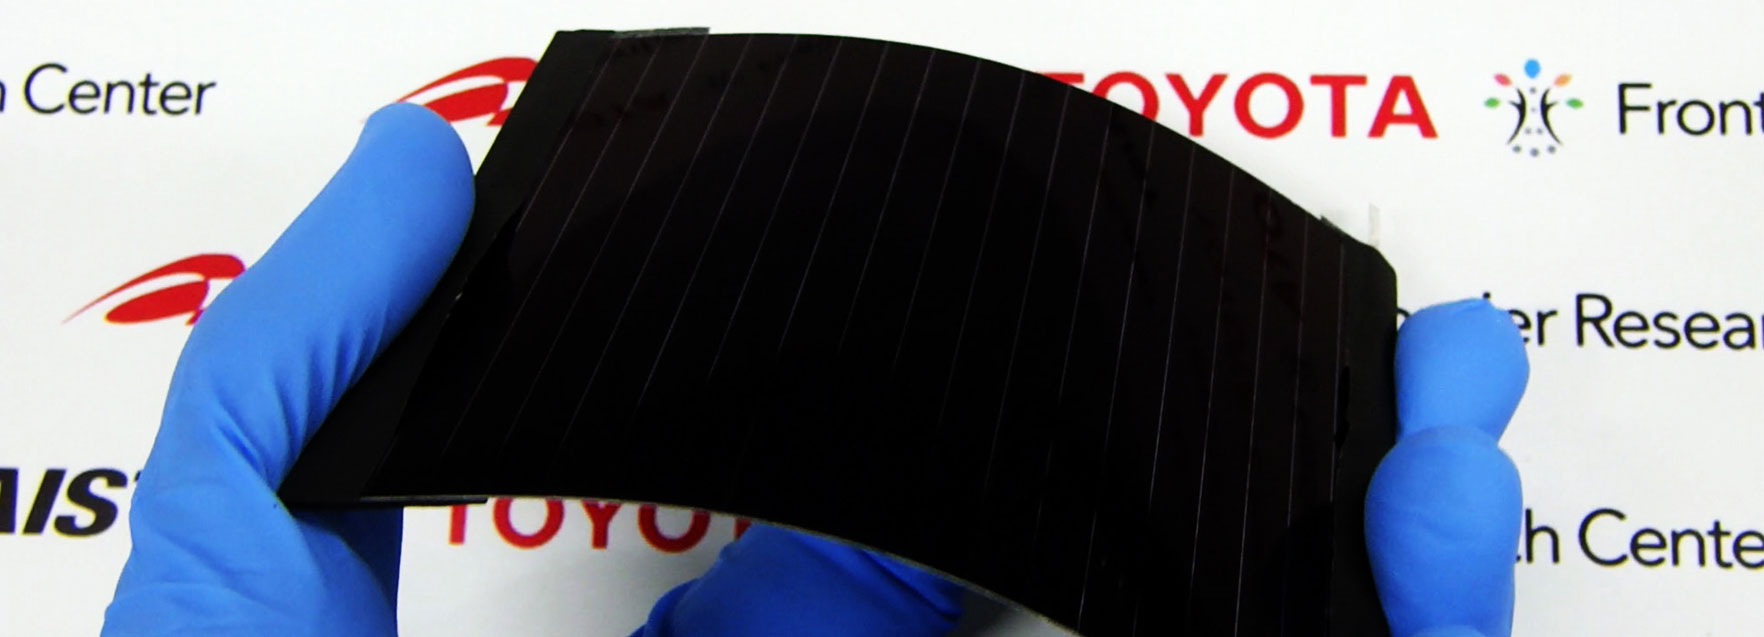 The flexible CIS solar cell mini-module that has joint-researched with Toyota and the National Institute of Advanced Industrial Science and Technology (AIST).